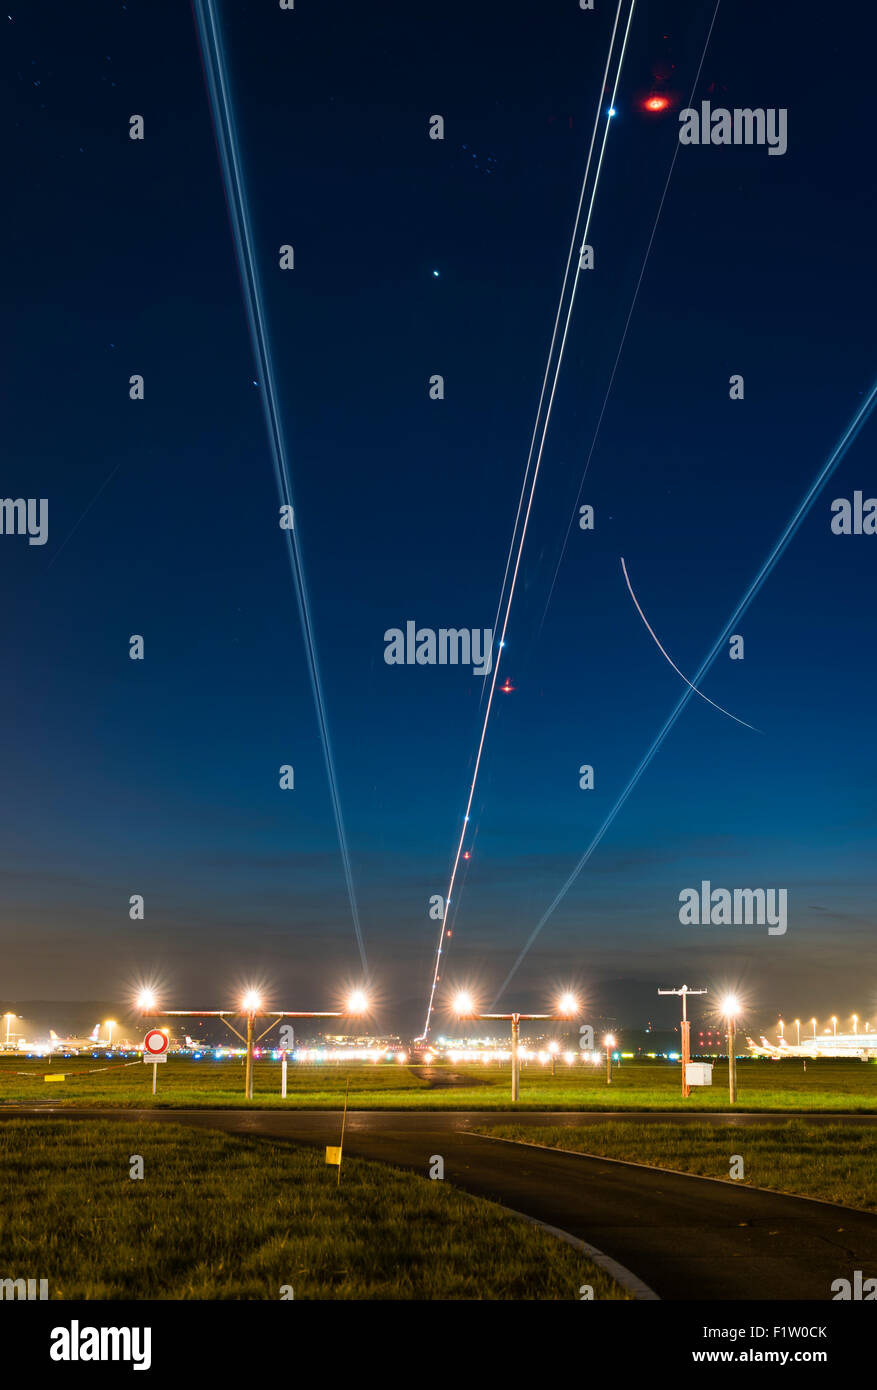 Traces from landing airplanes are illuminating the dark sky above the touch-down point of runway 28 of Zurich Kloten airport. Stock Photo